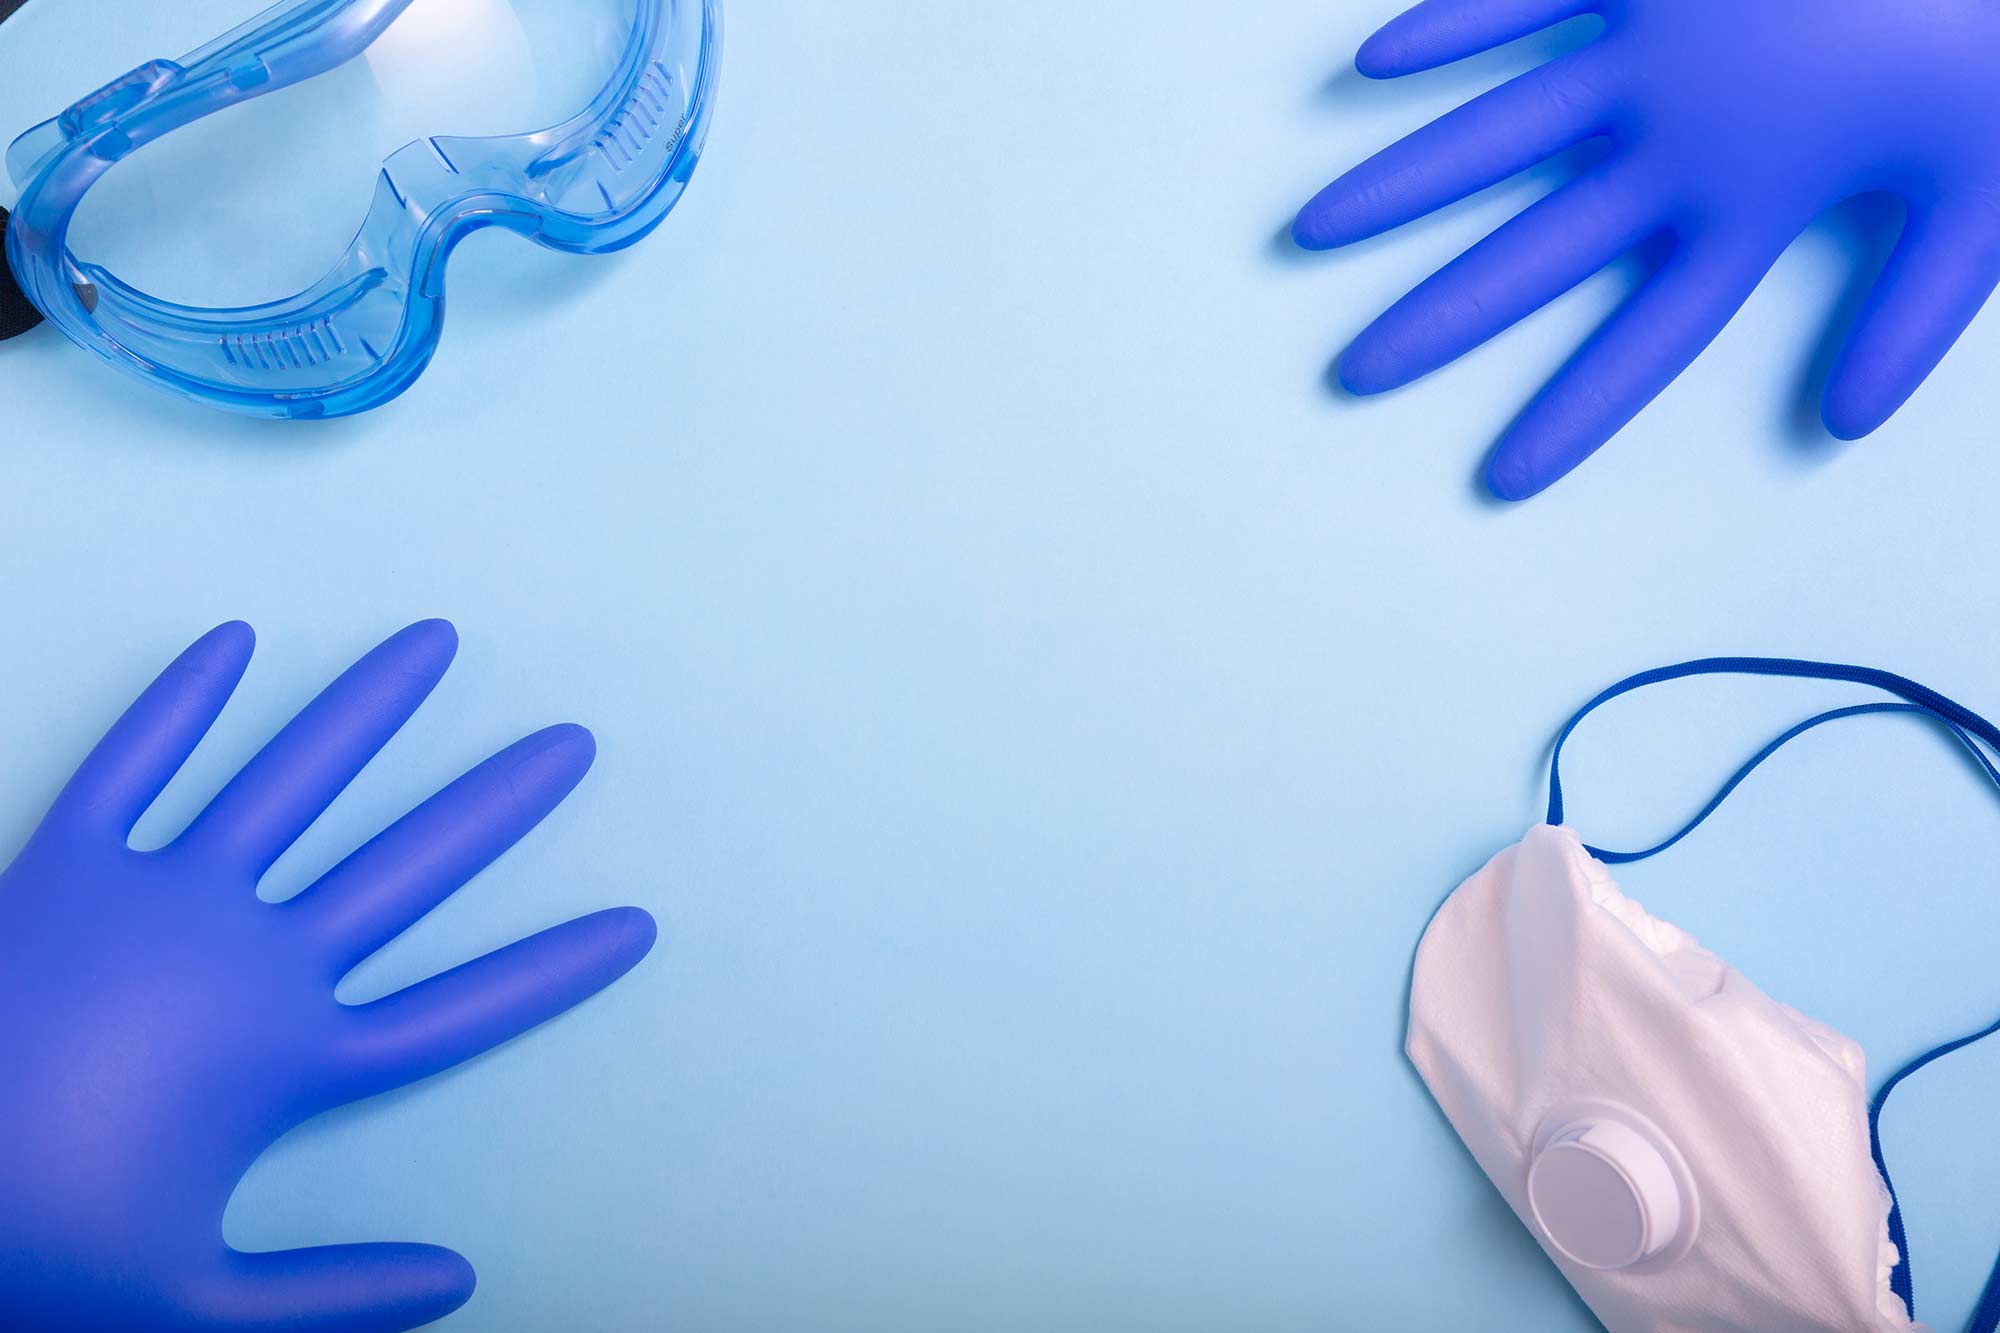 The British Association of Private Dentistry (BAPD) is urging the government to change its guidance on PPE and fallow time